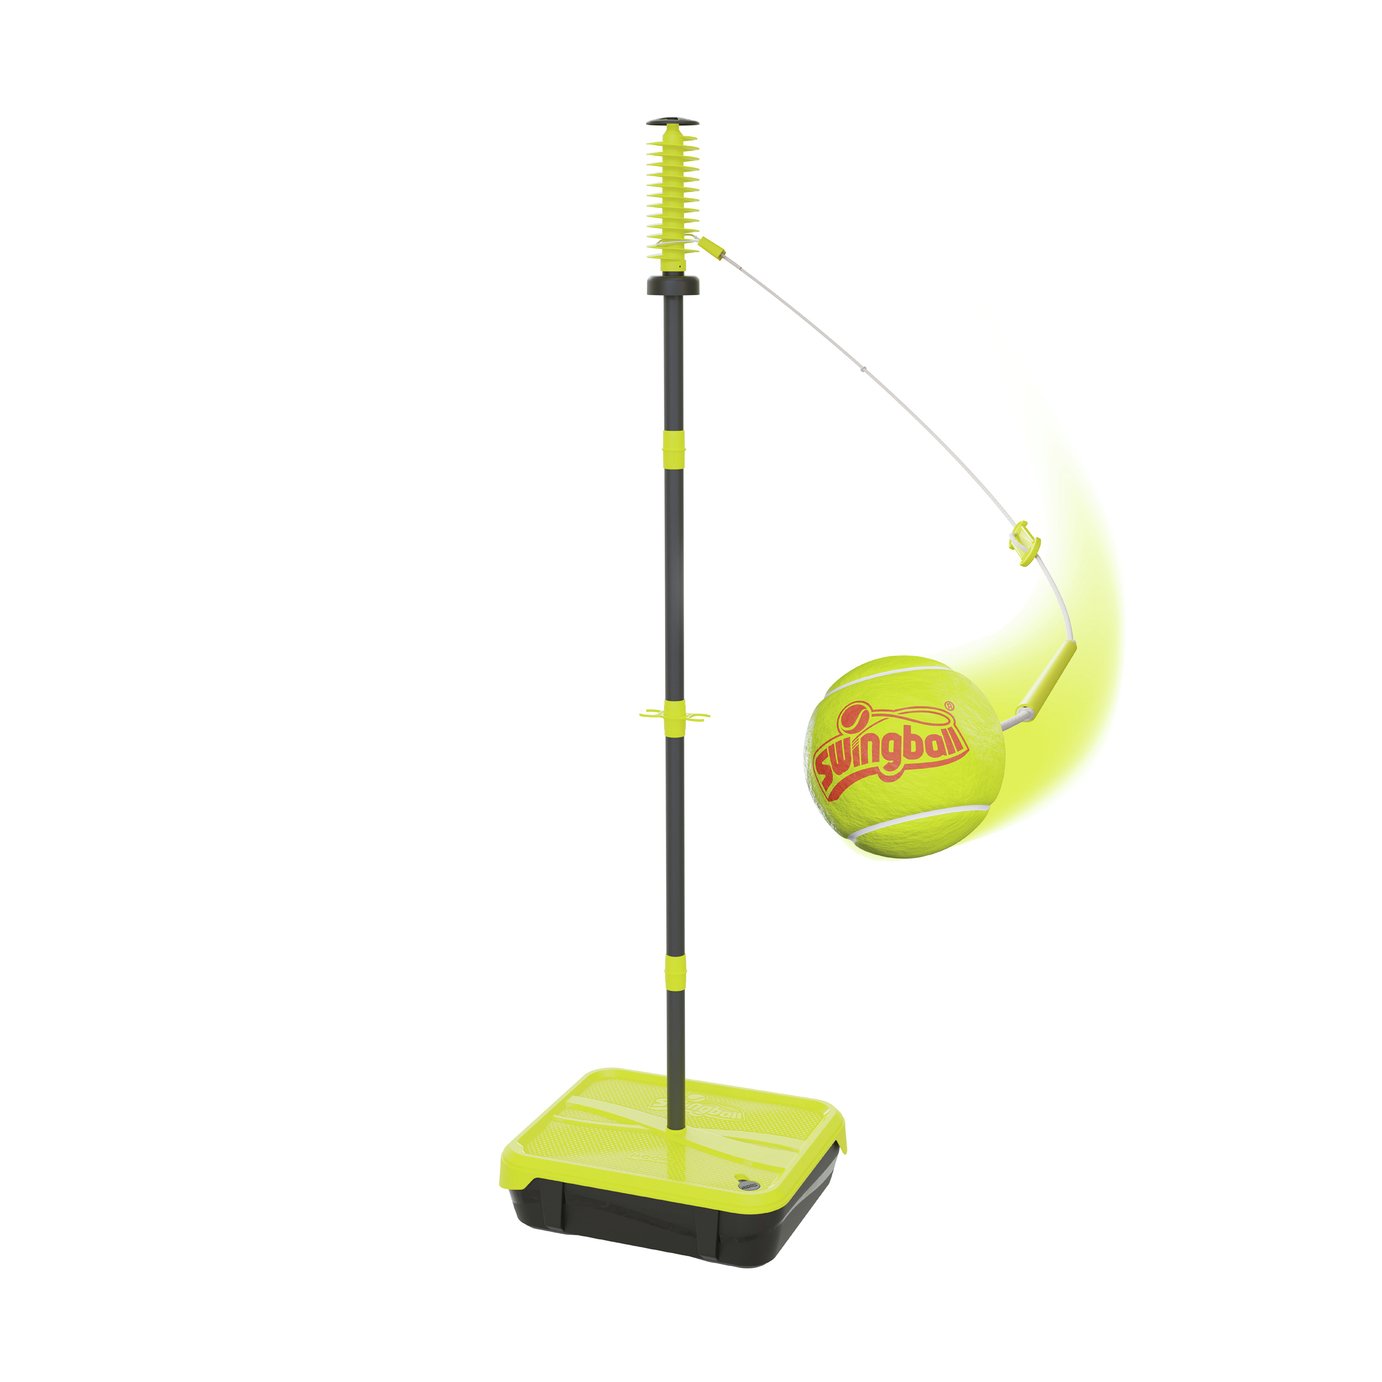 Pro Swingball All Surface Review